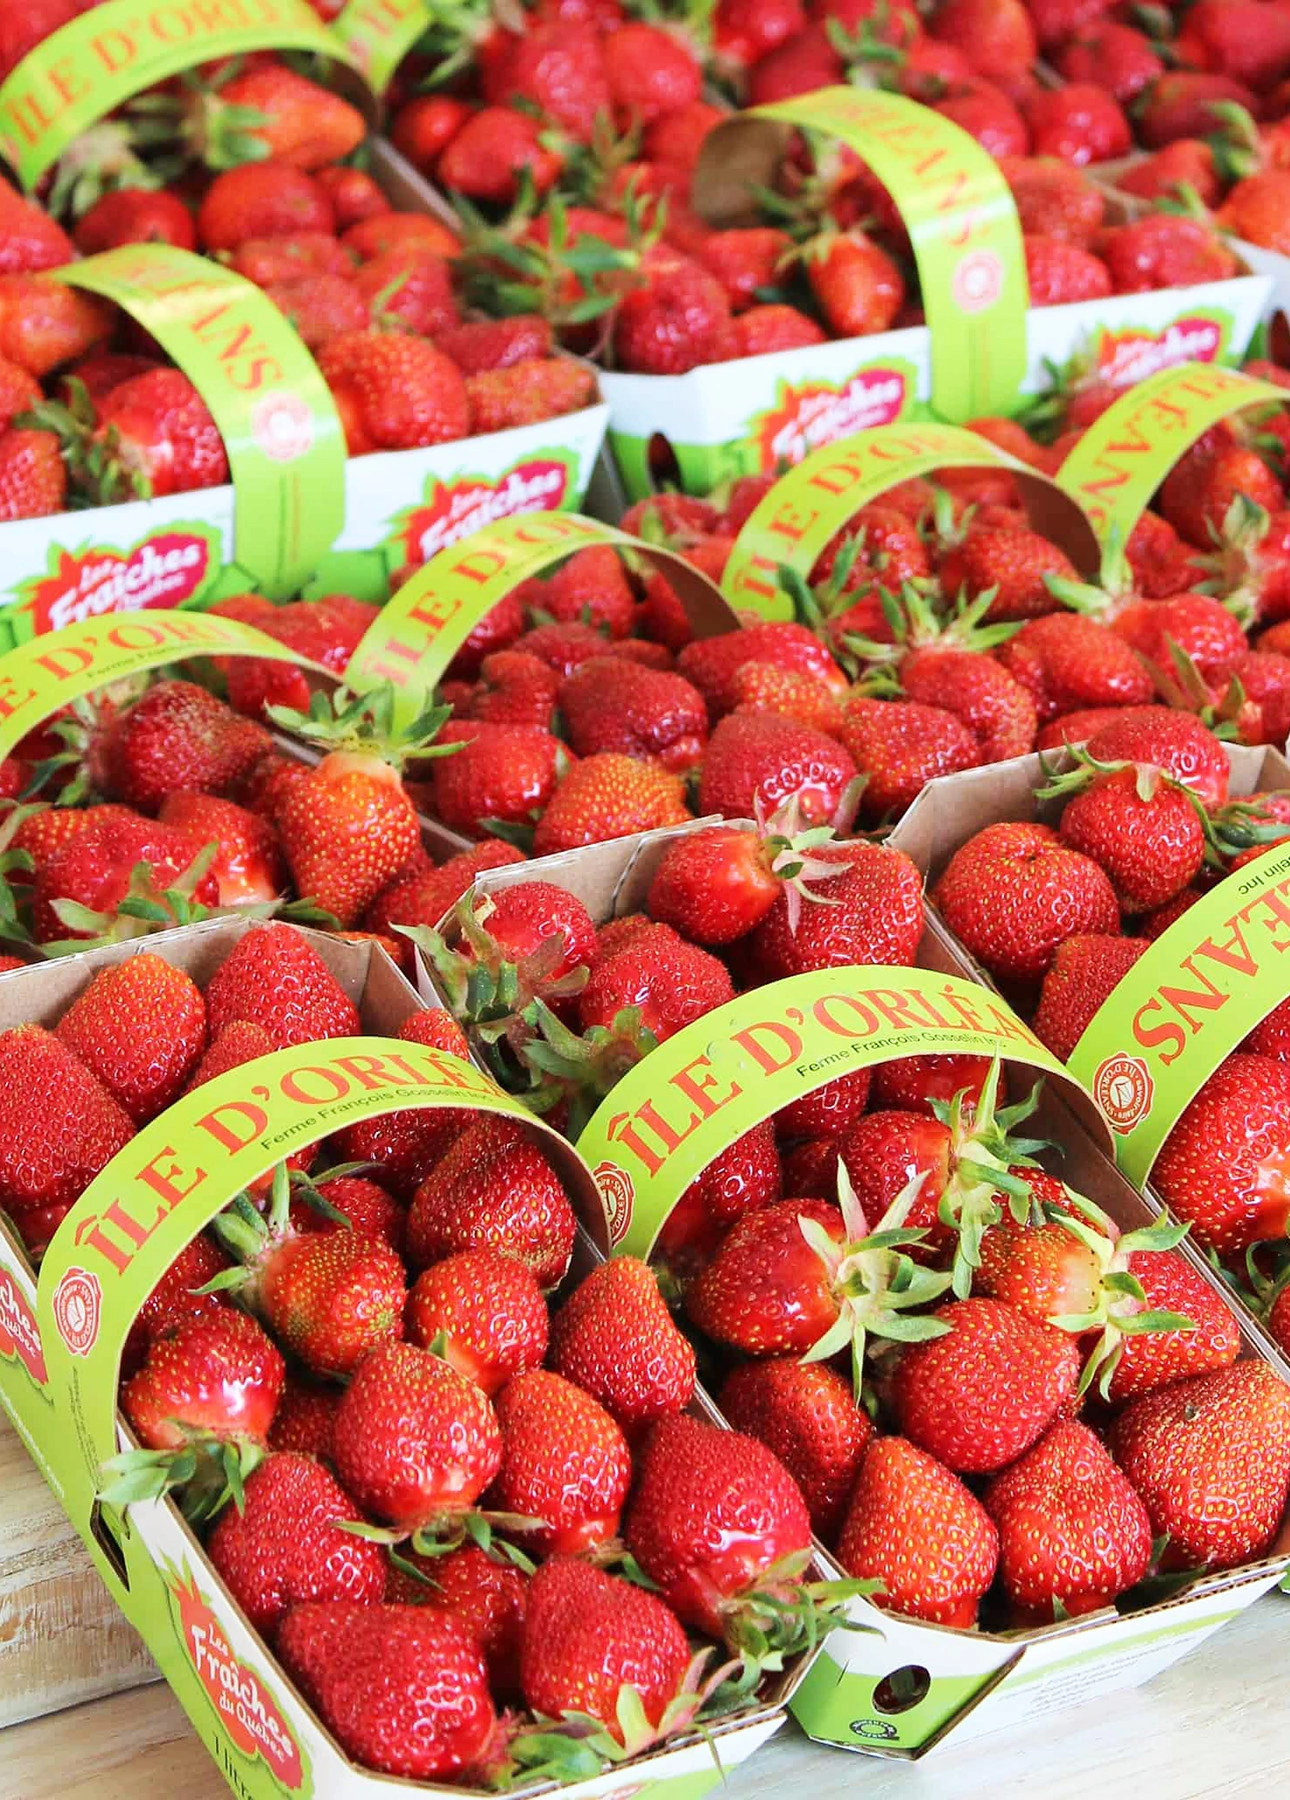 Strawberries from Île d'Orléans are said to be among the best in the province of Québec // FoodNouveau.com